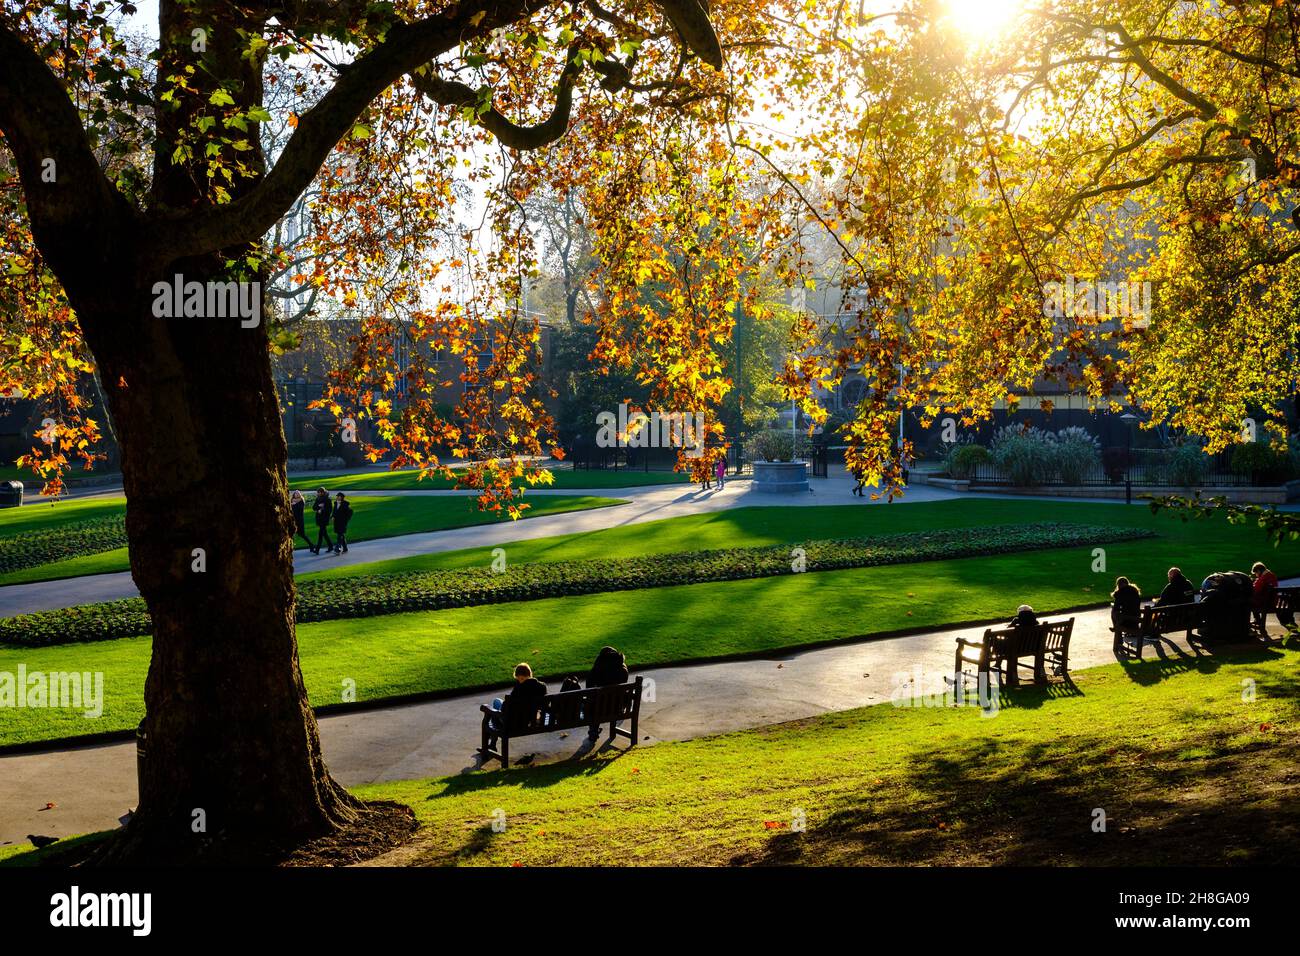 People sit on benches in Victoria Embankment Gardens Stock Photo